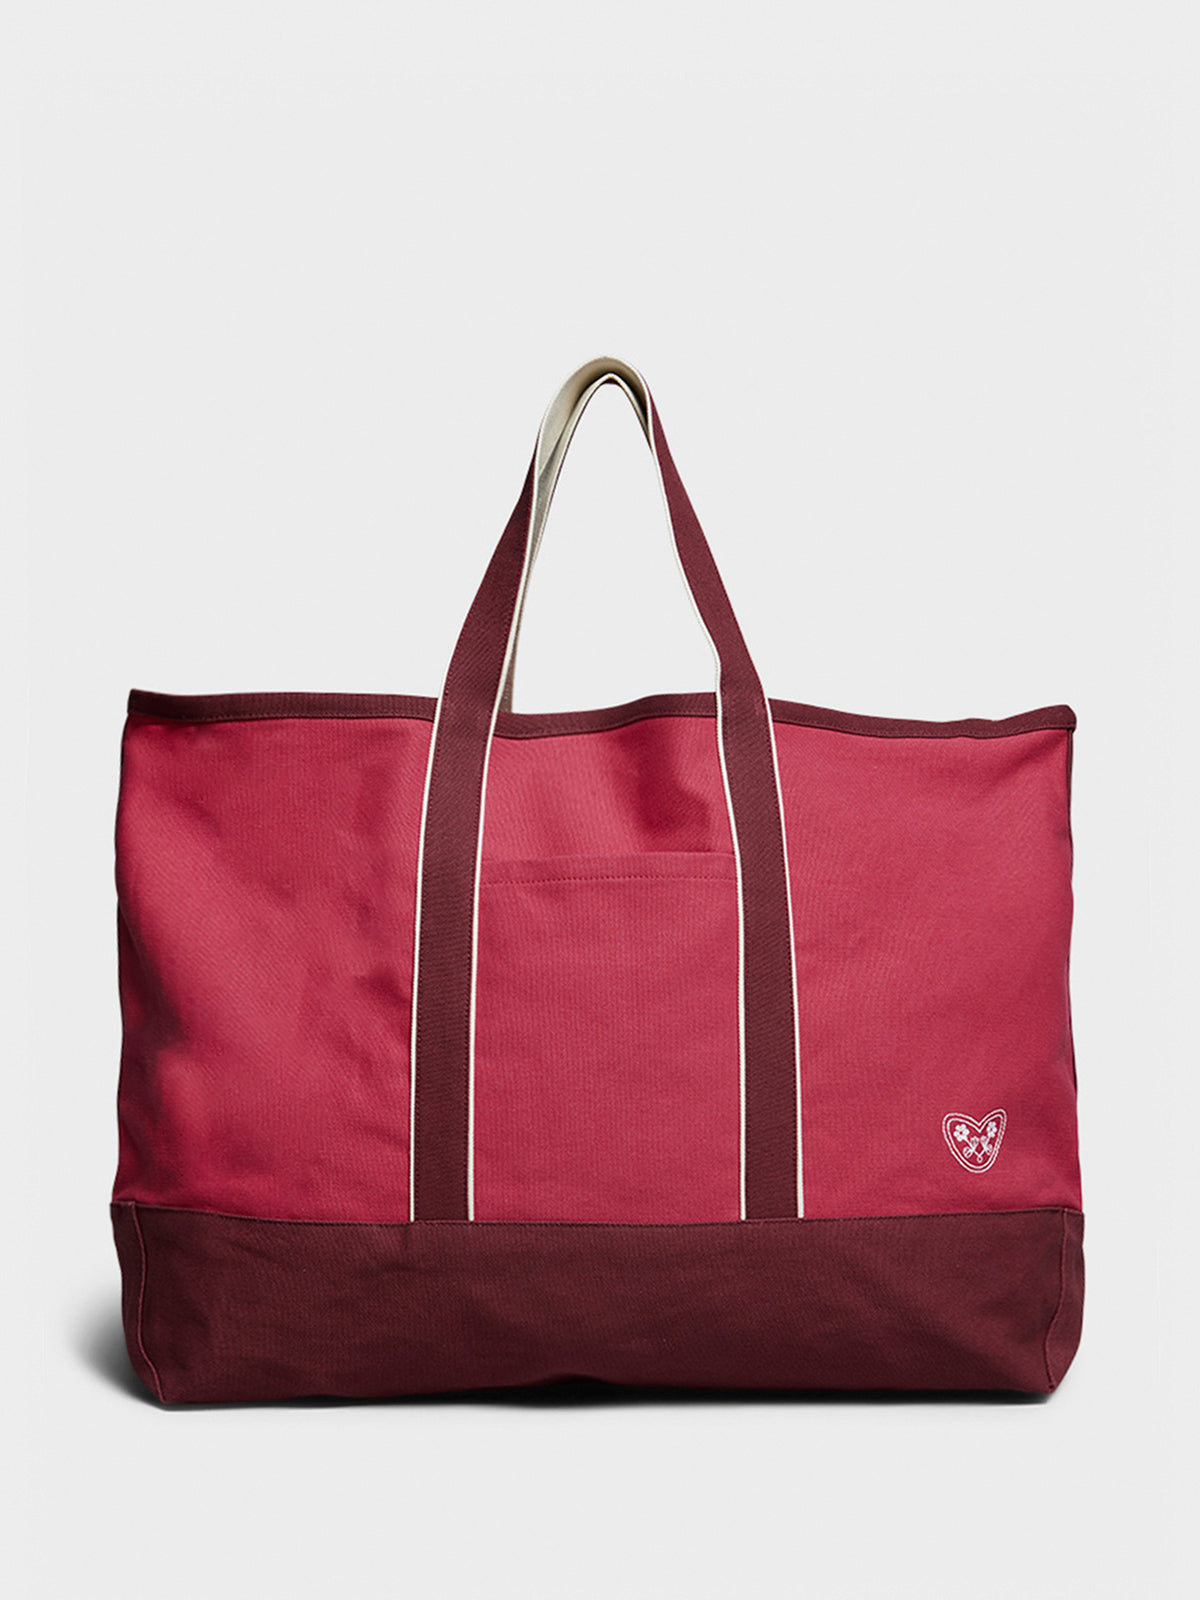 Easy Bag Large in Red and Burgundy